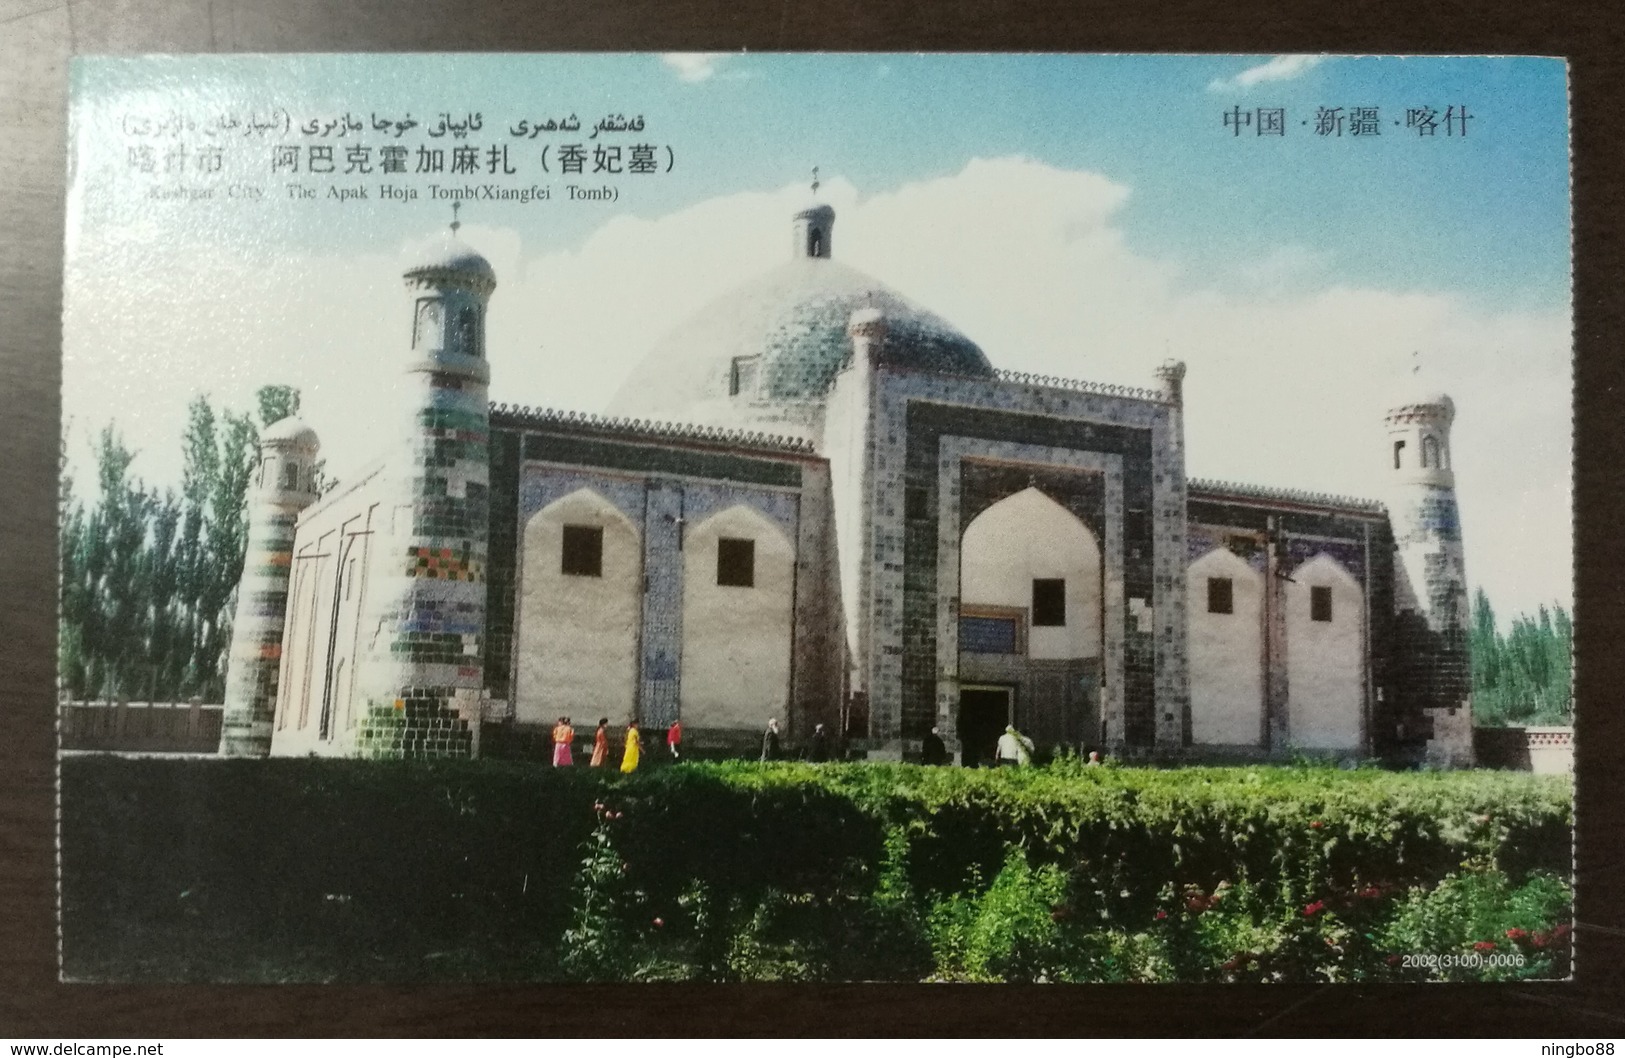 Islamic Ancient Architecture Kashgar City The Apak Hoja Tomb(xiangfei Tomb),CN 02 Xinjiang Landscape Pre-stamped Card - Islam